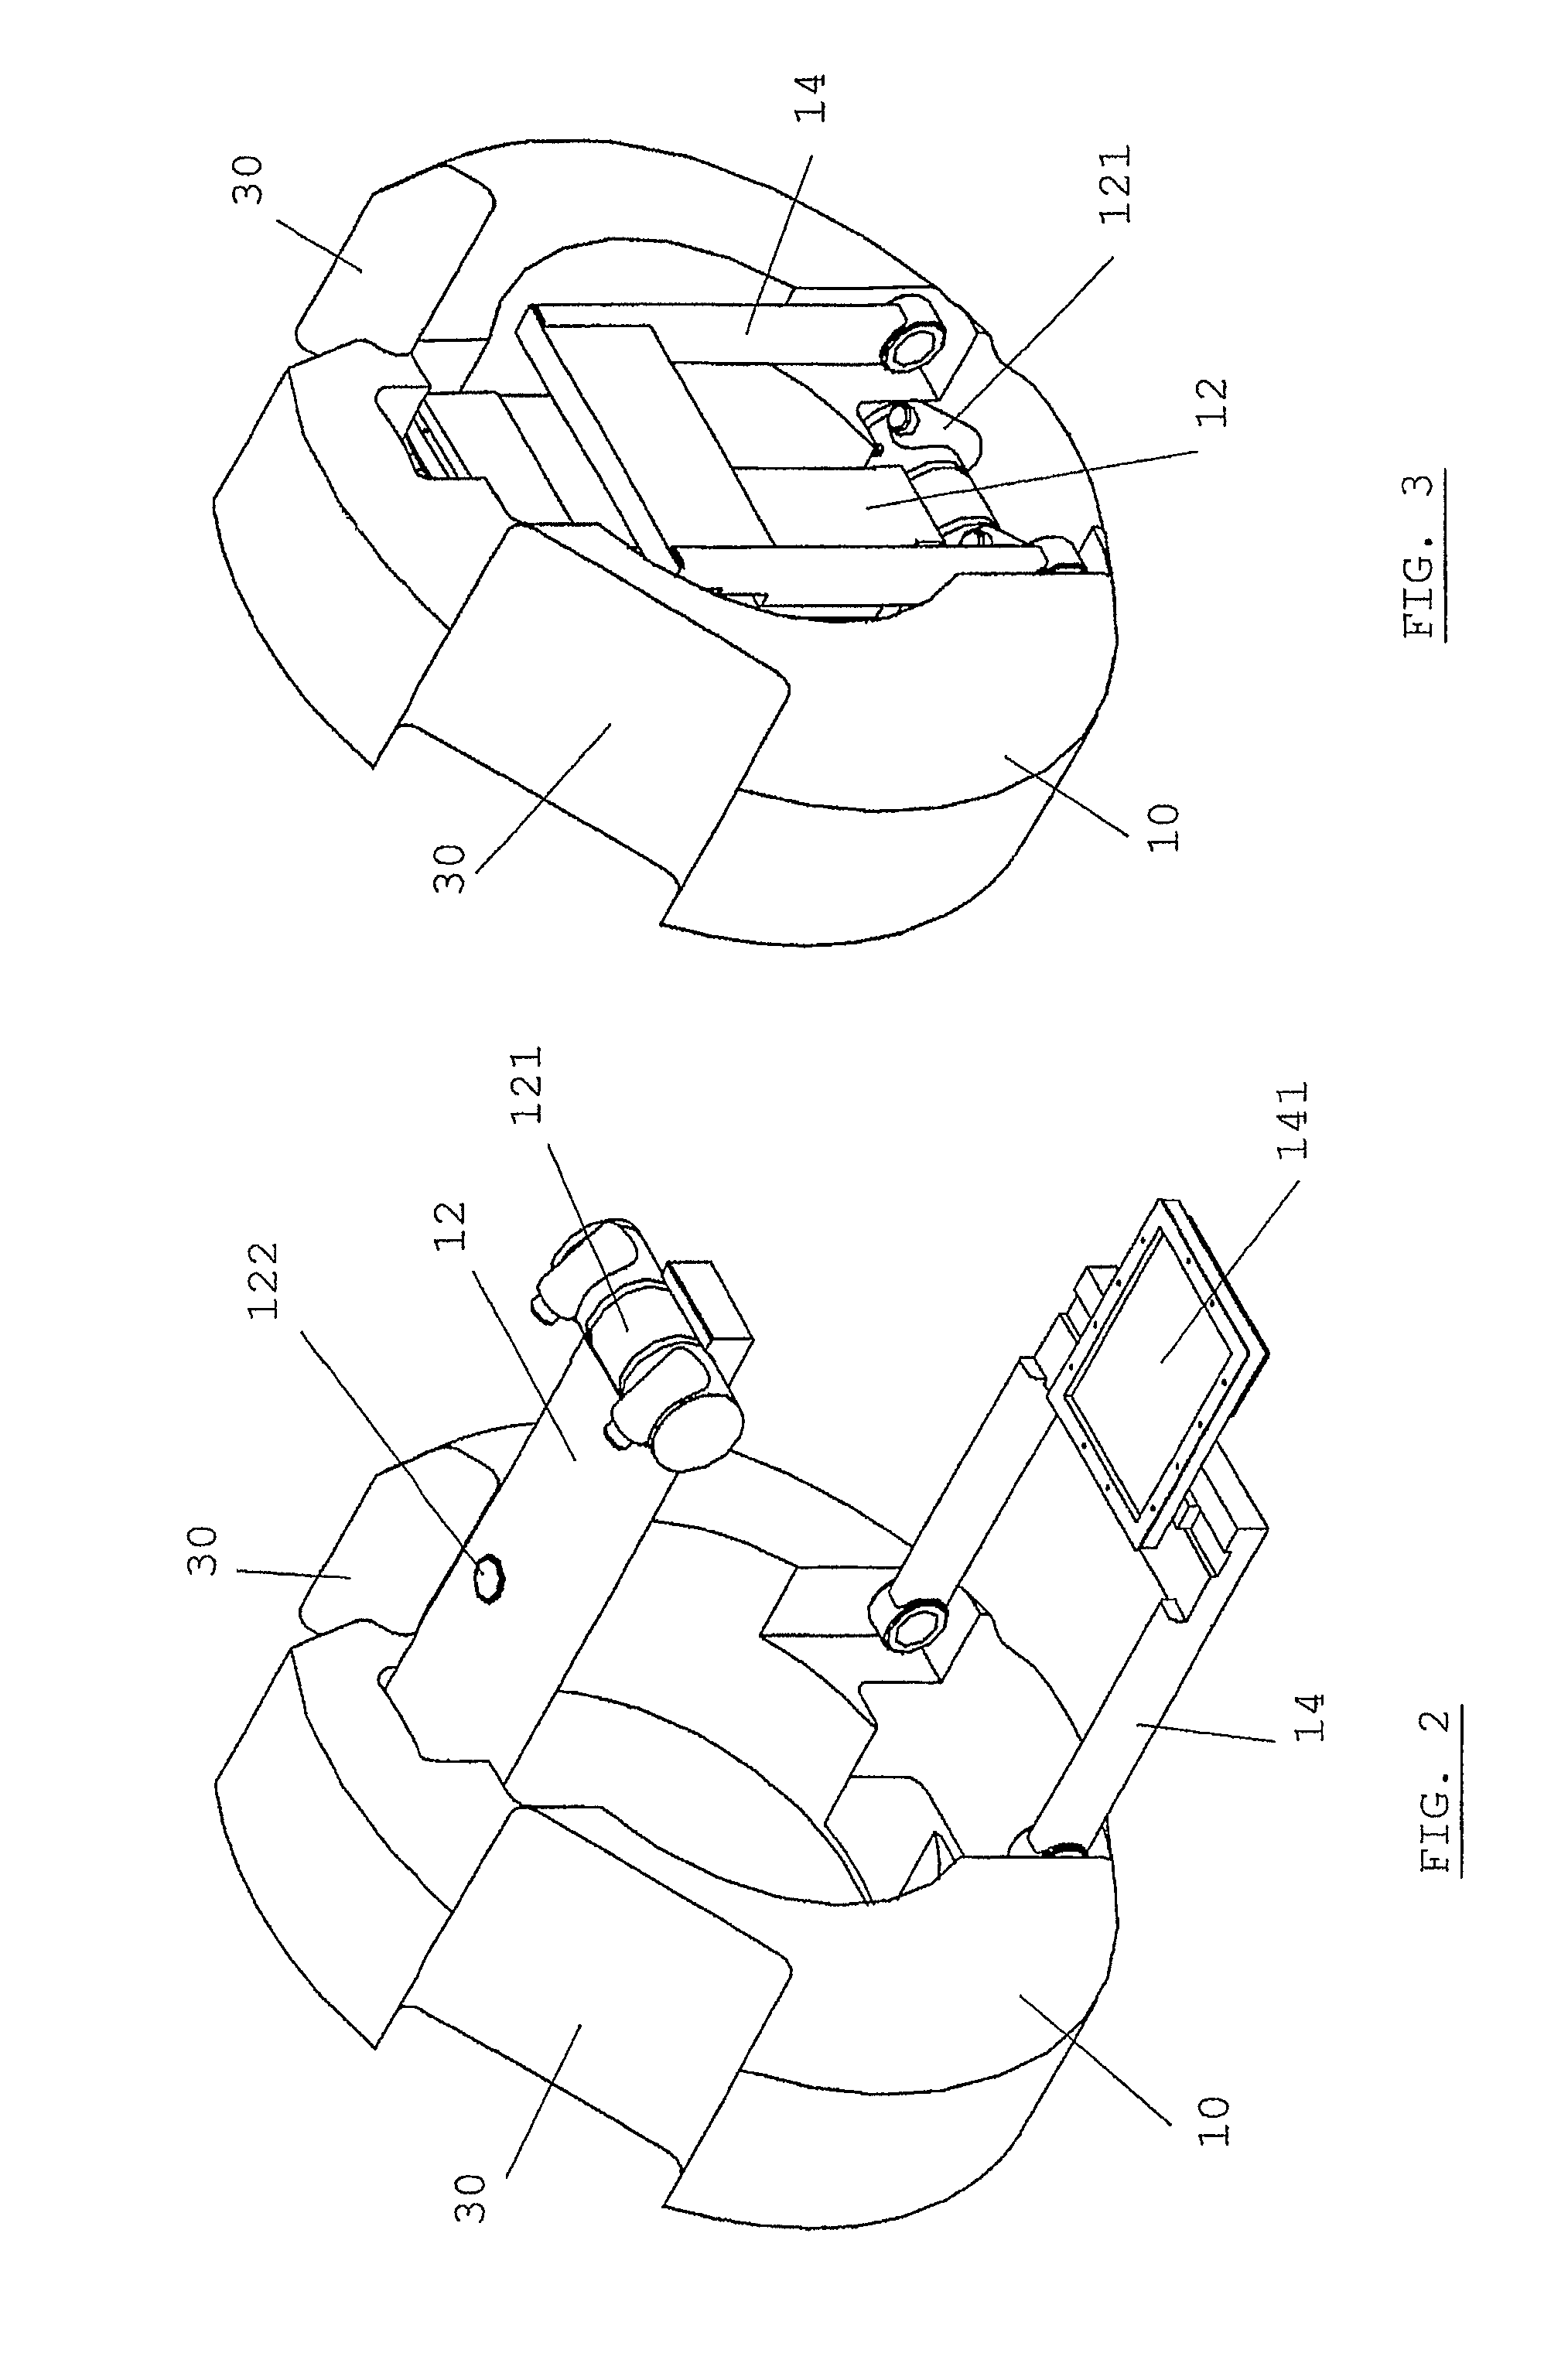 Patient positioning imaging device and method